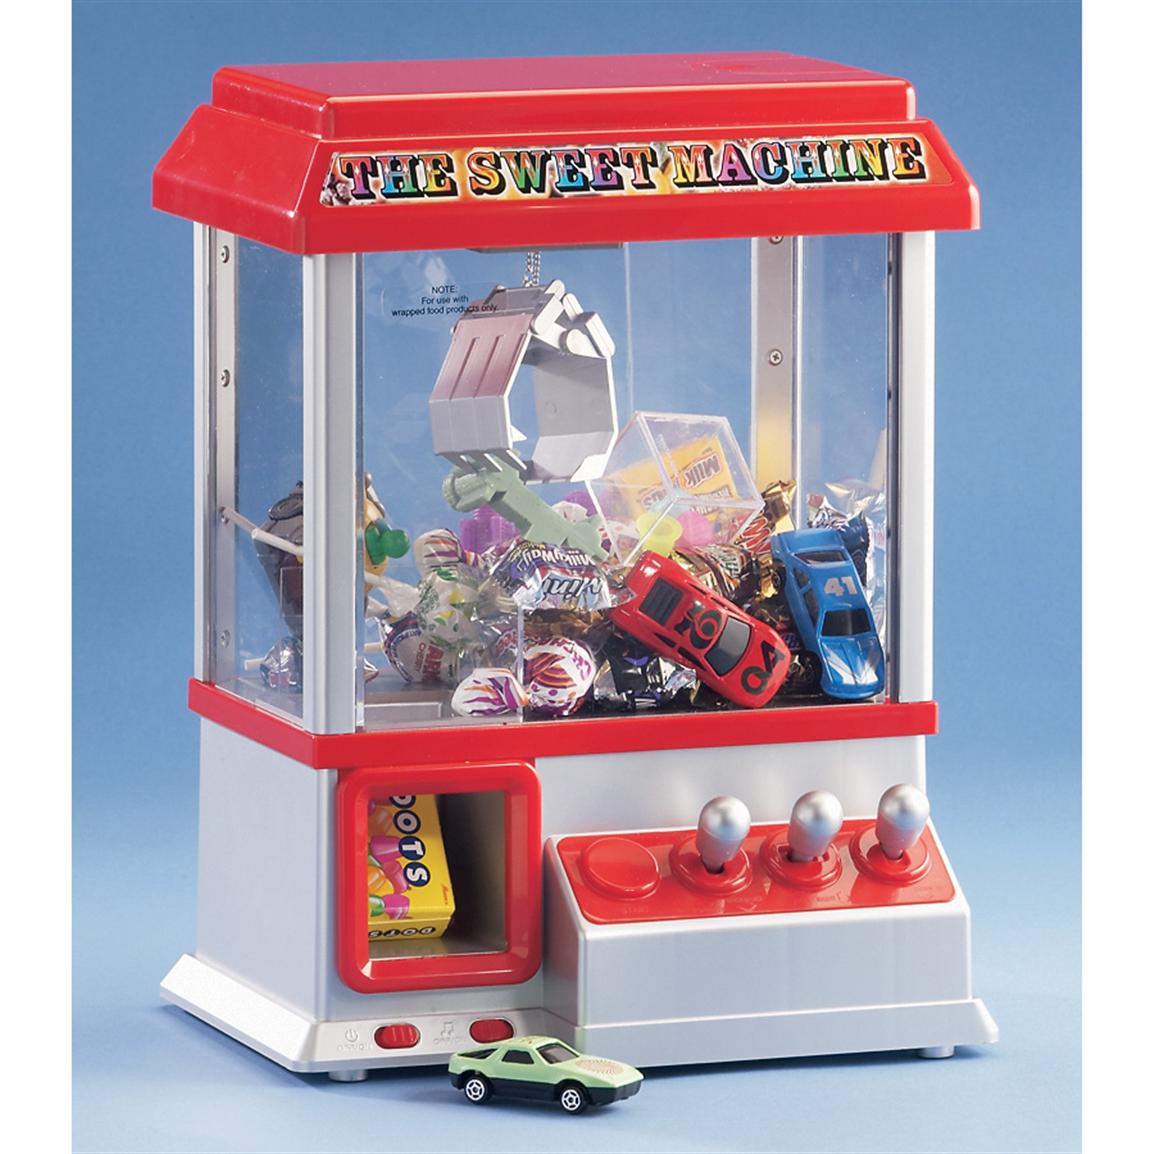 "The Sweet Machine" Arcade Claw Machine 98866, Toys at Sportsman's Guide